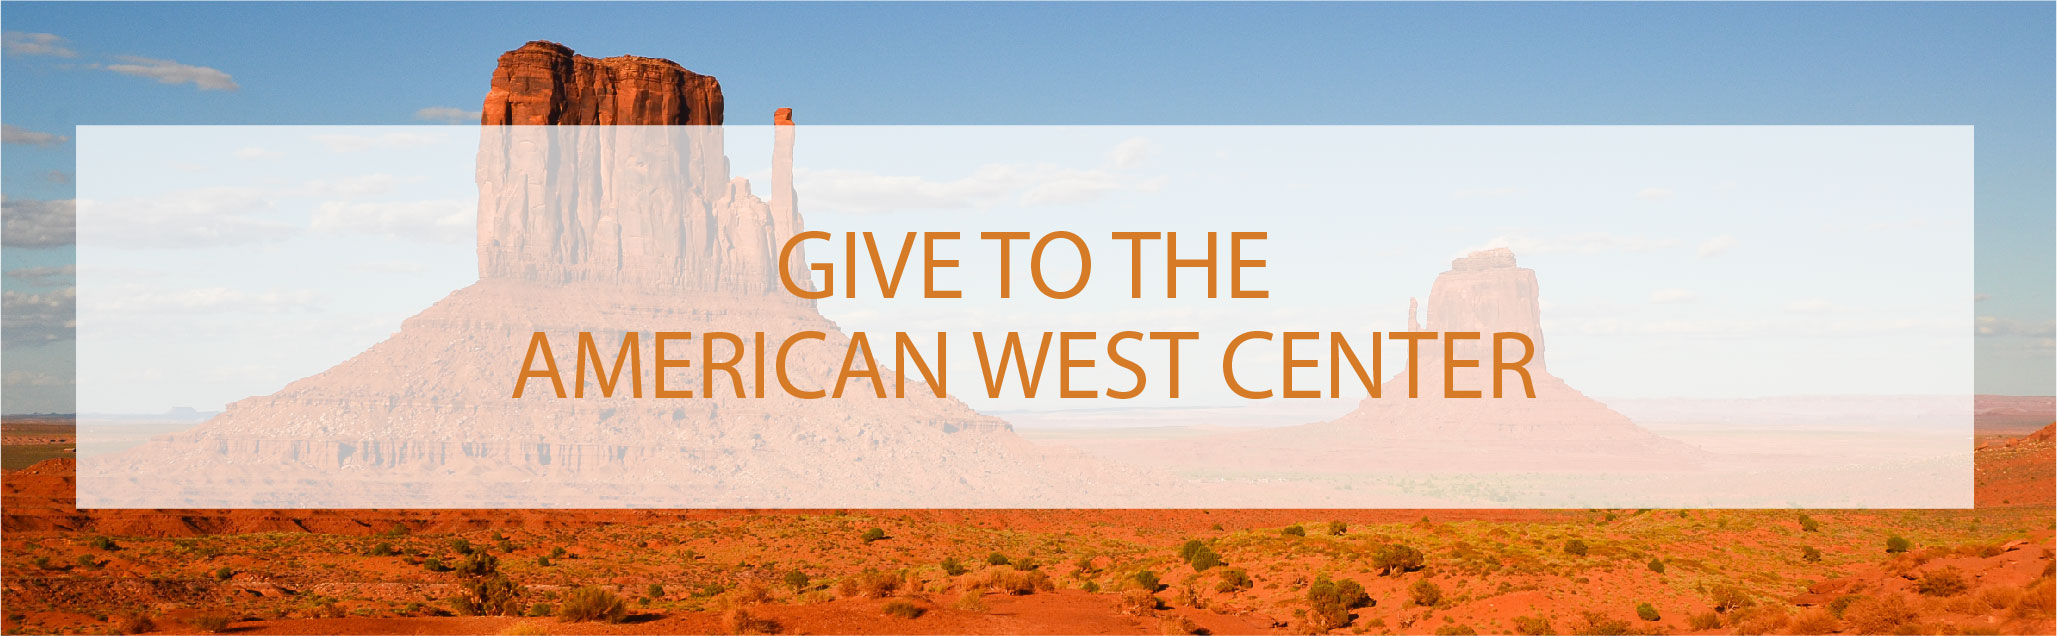 Give to the American West Center